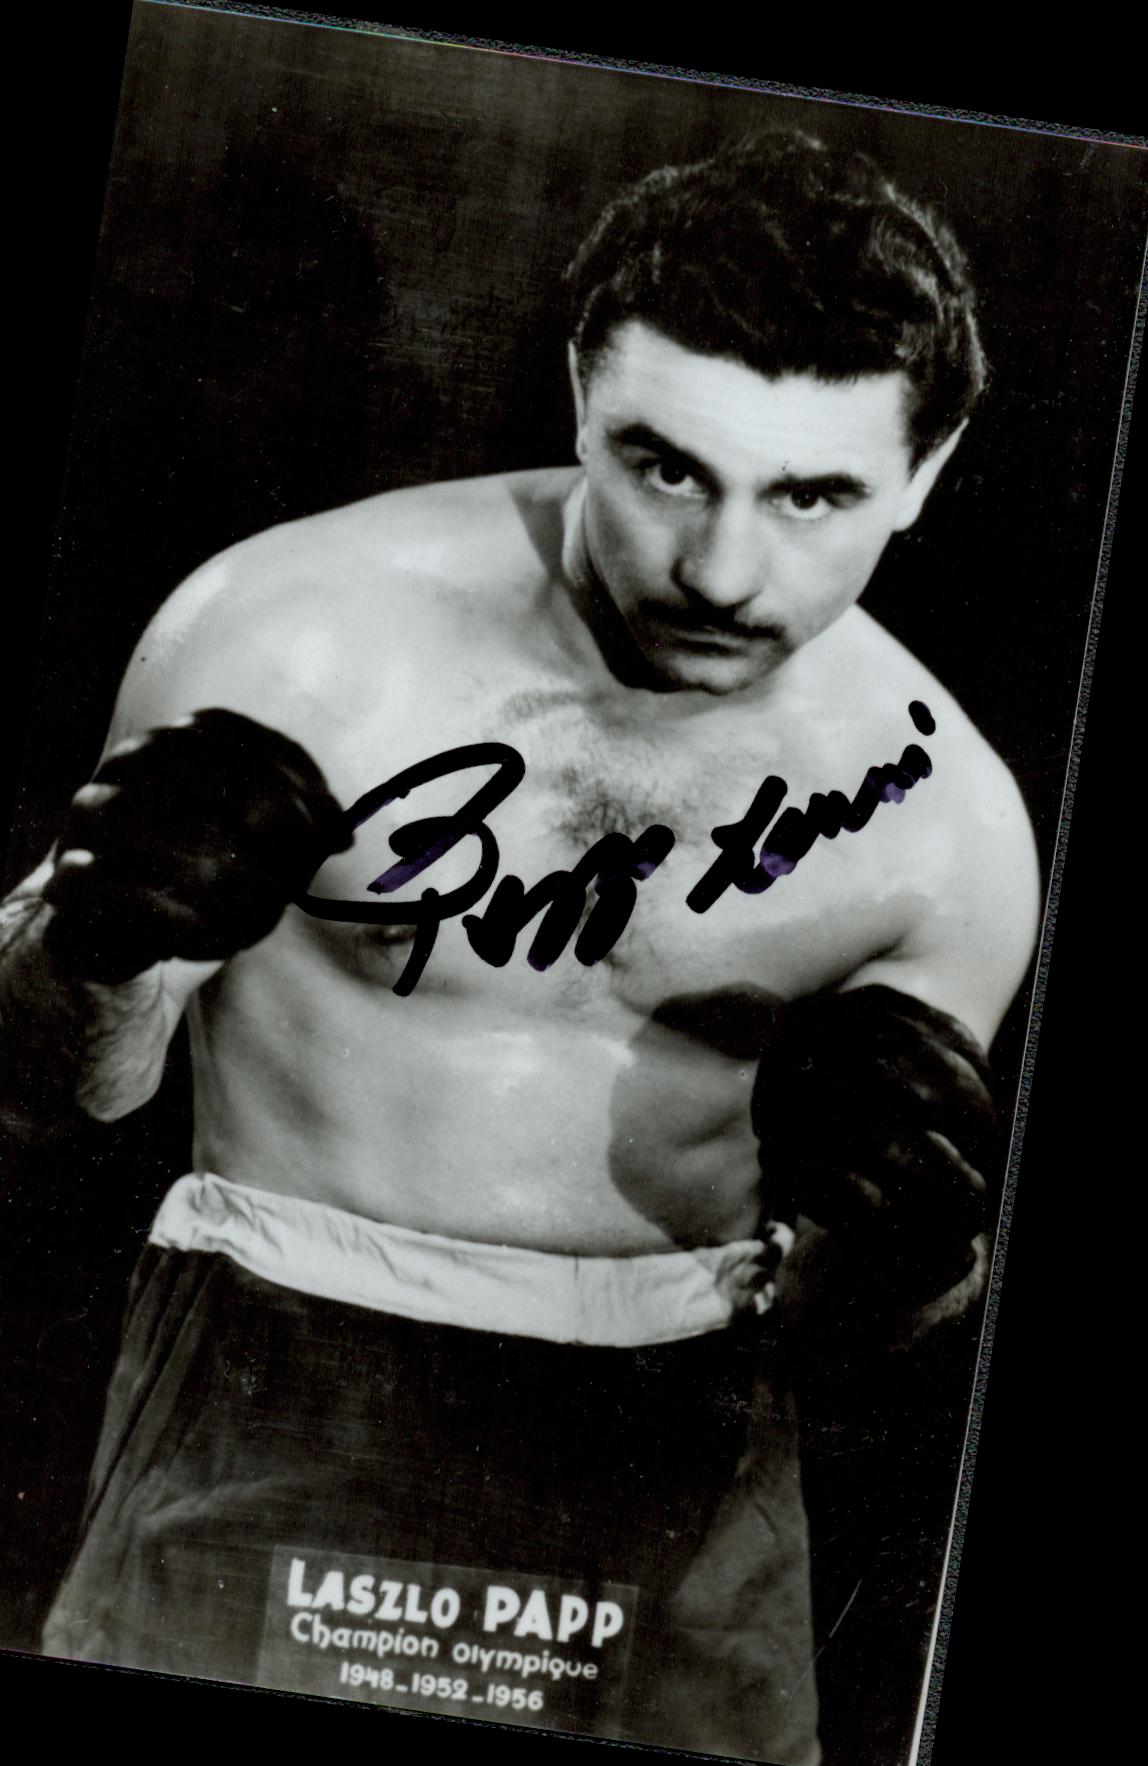 Boxer Laszlo Papp signed 6 x 4 b/w boxing pose photo. Good condition. All autographs come with a